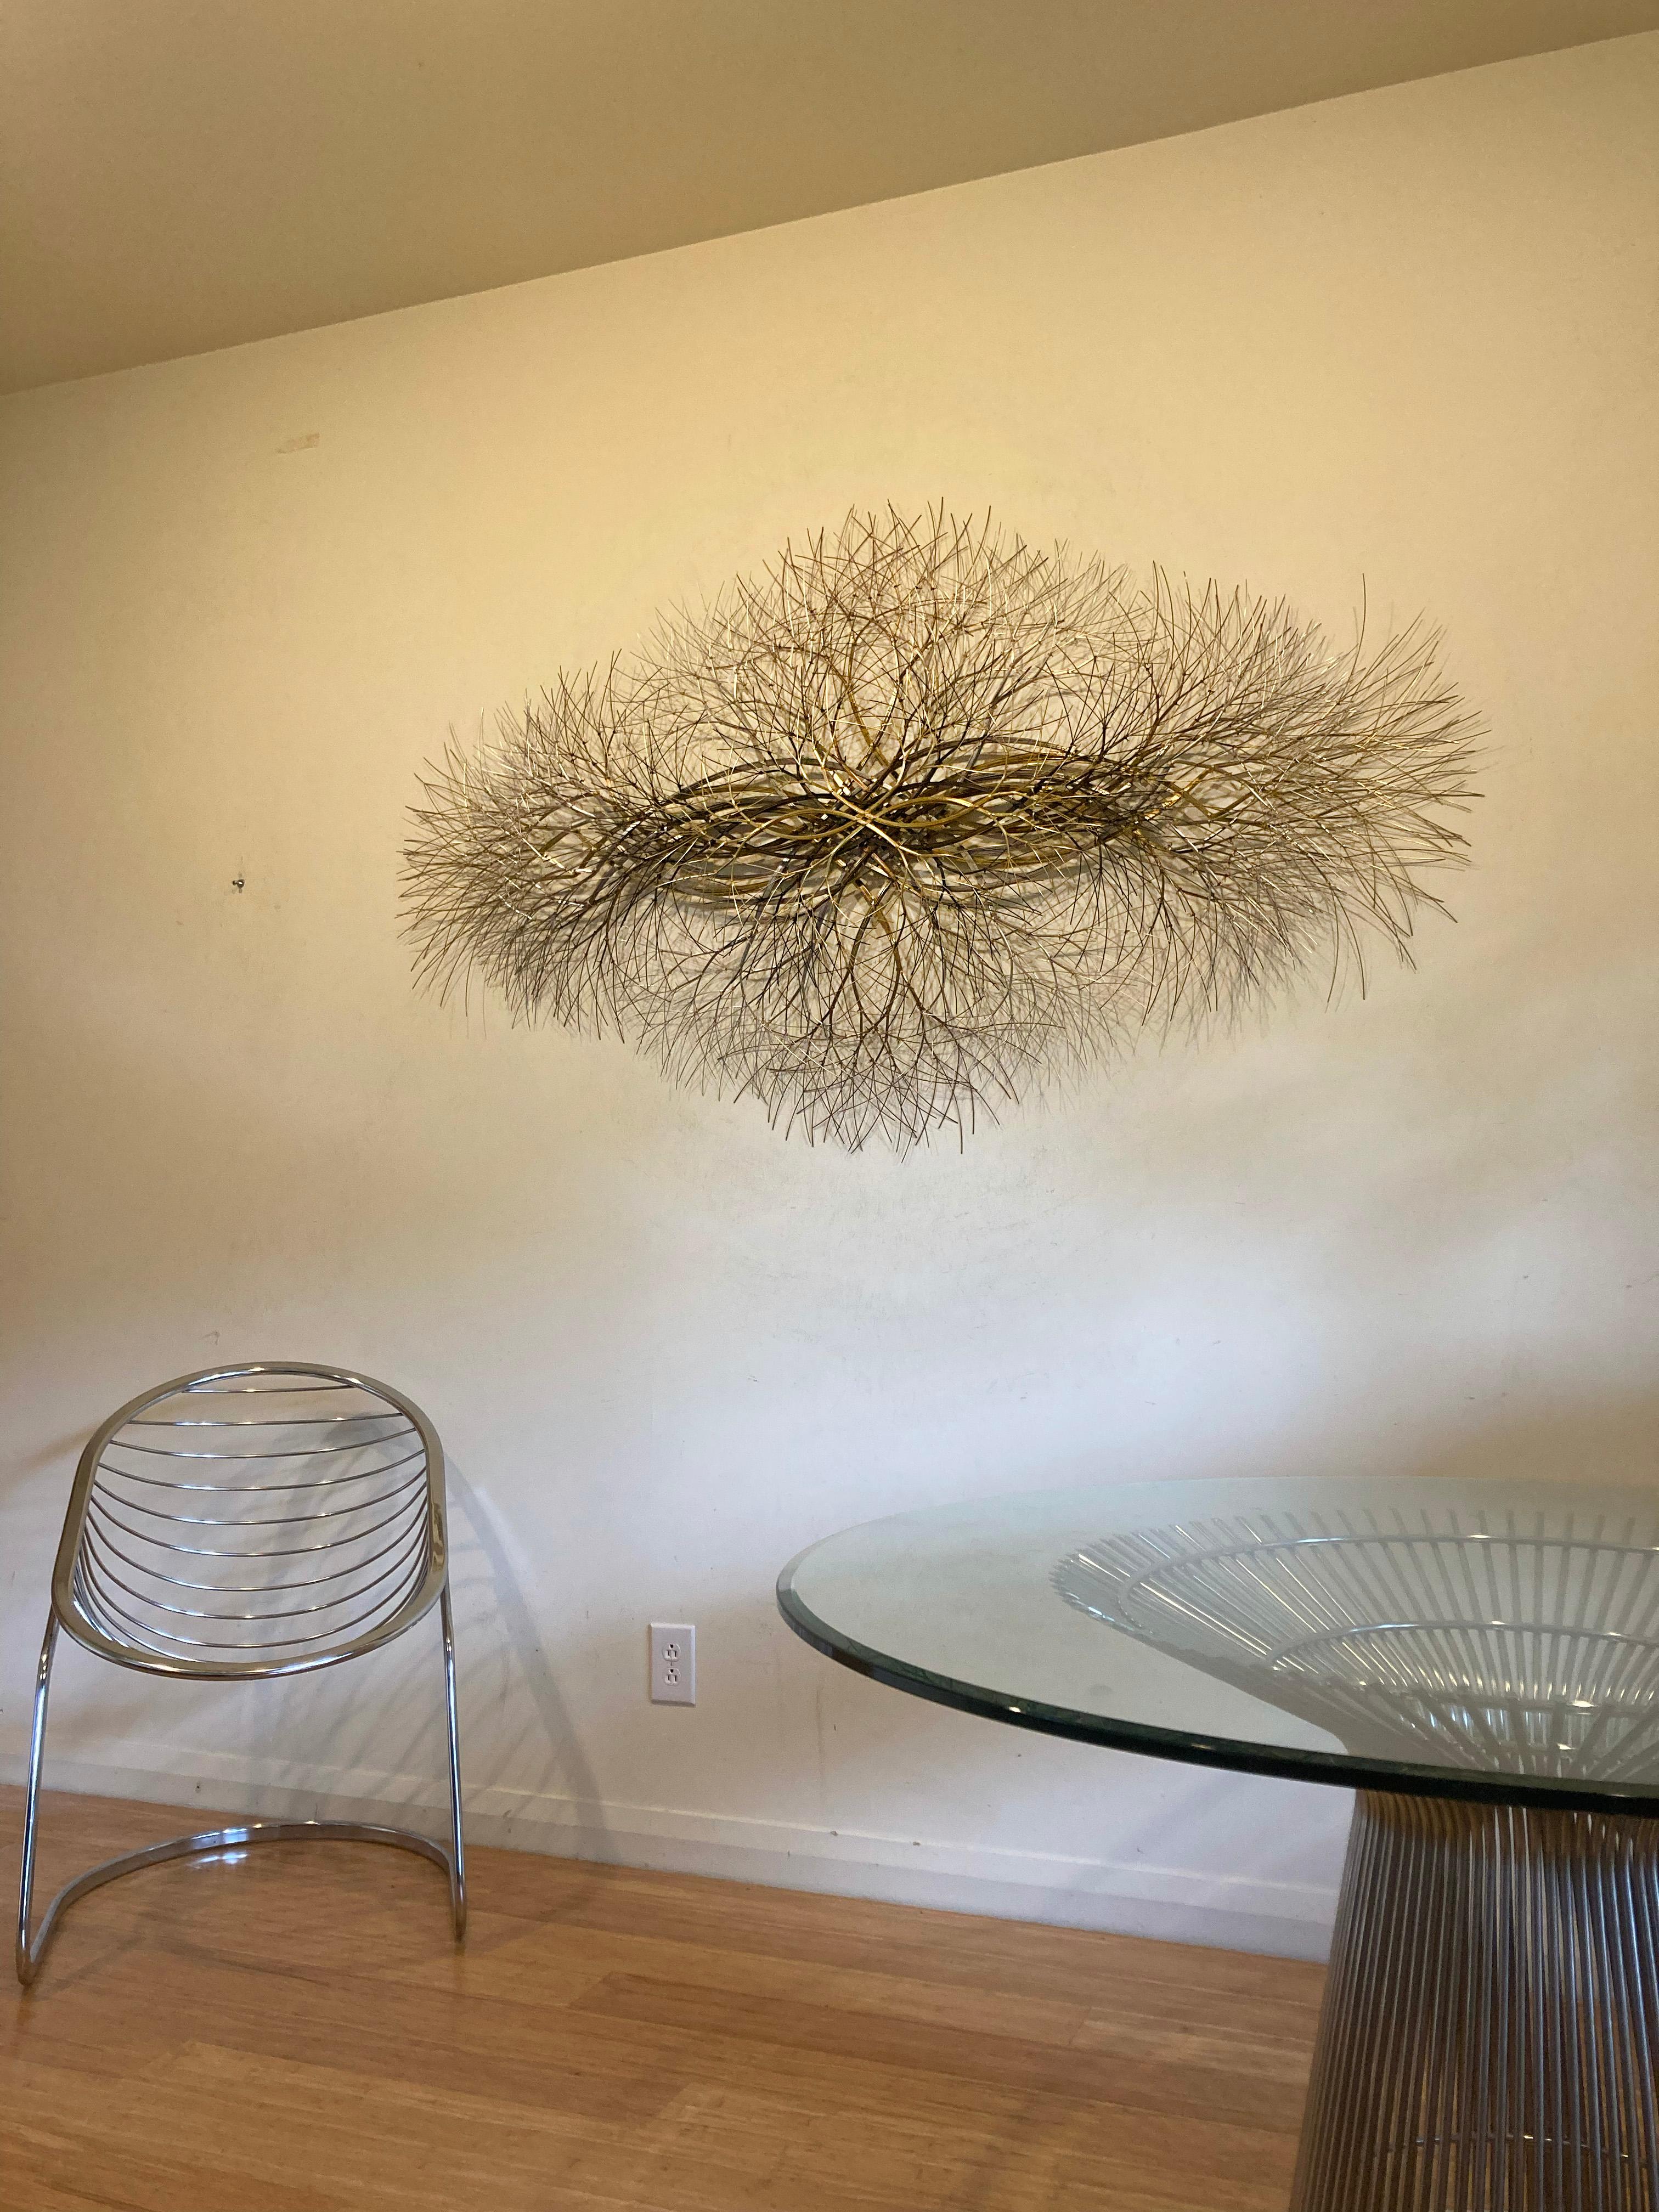 Bronze, brass, and stainless steel wire. 

This abstract sculpture is suitable for an entryway or perhaps a yoga studio or spiritual space. The artist uses a modern aesthetic reminiscent of trees, electricity, and light to create sculptures of